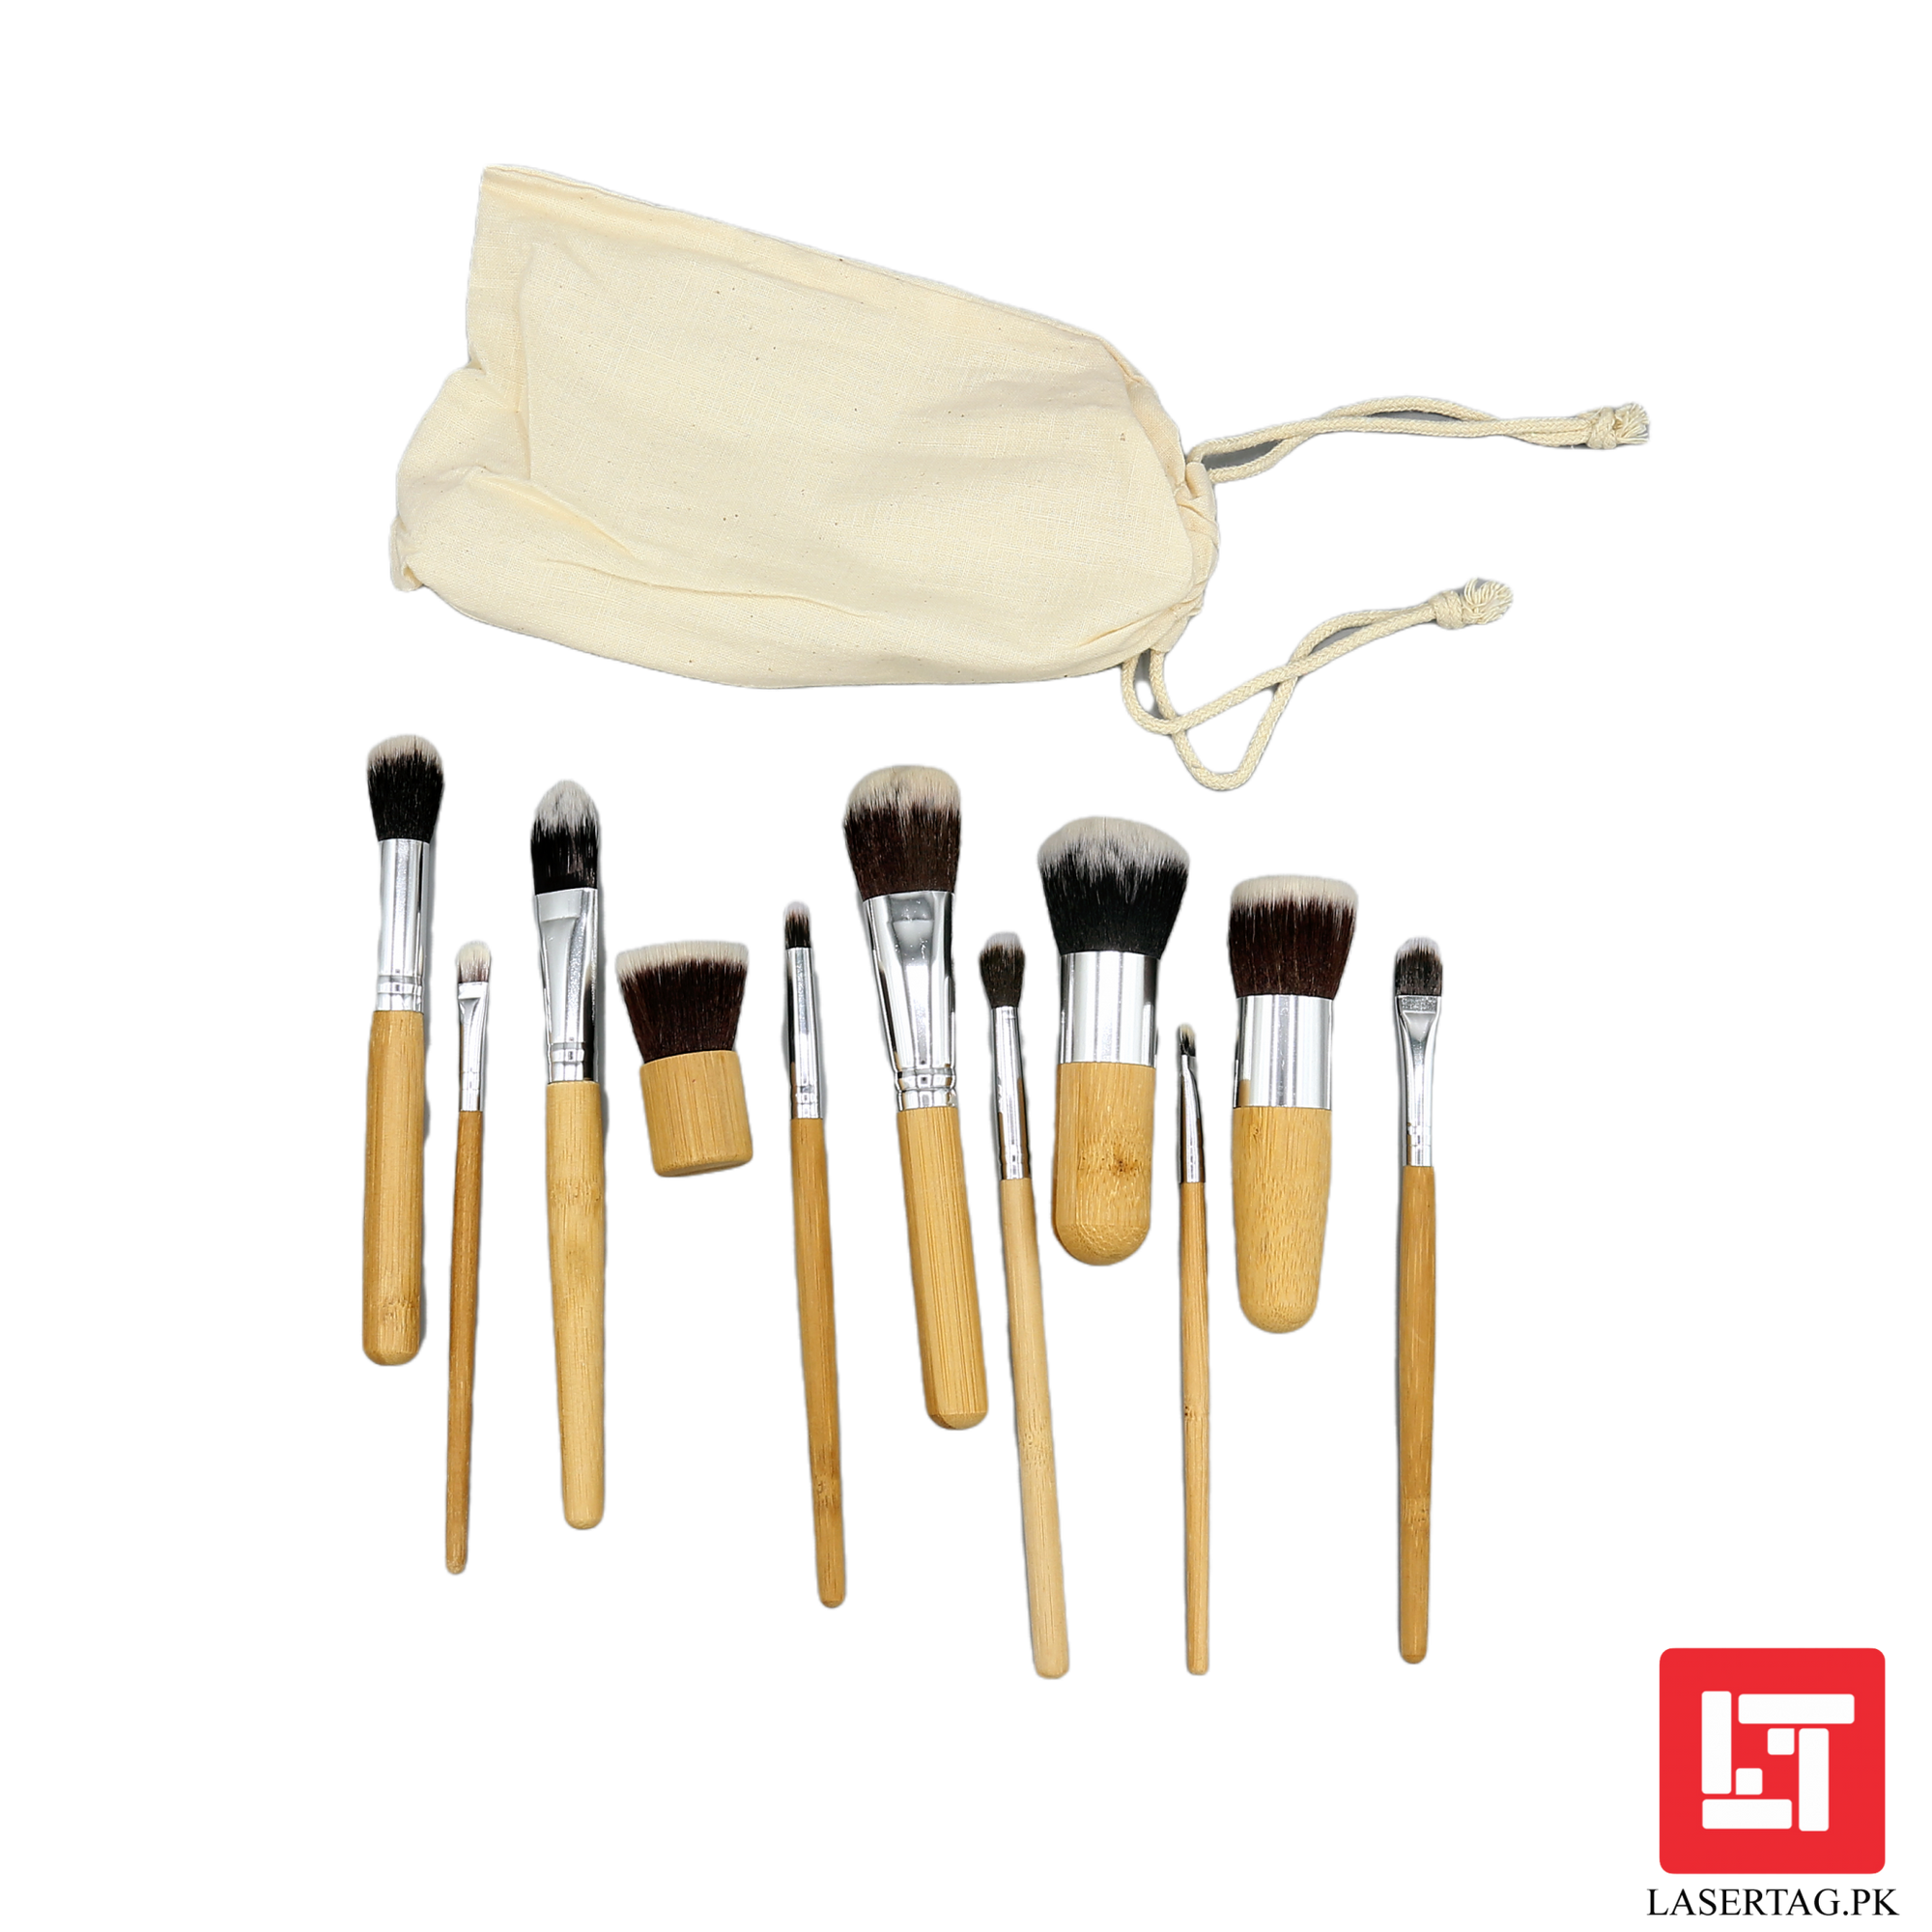 Wooden Brushes Makeup White Pouch 11Pcs freeshipping - lasertag.pk